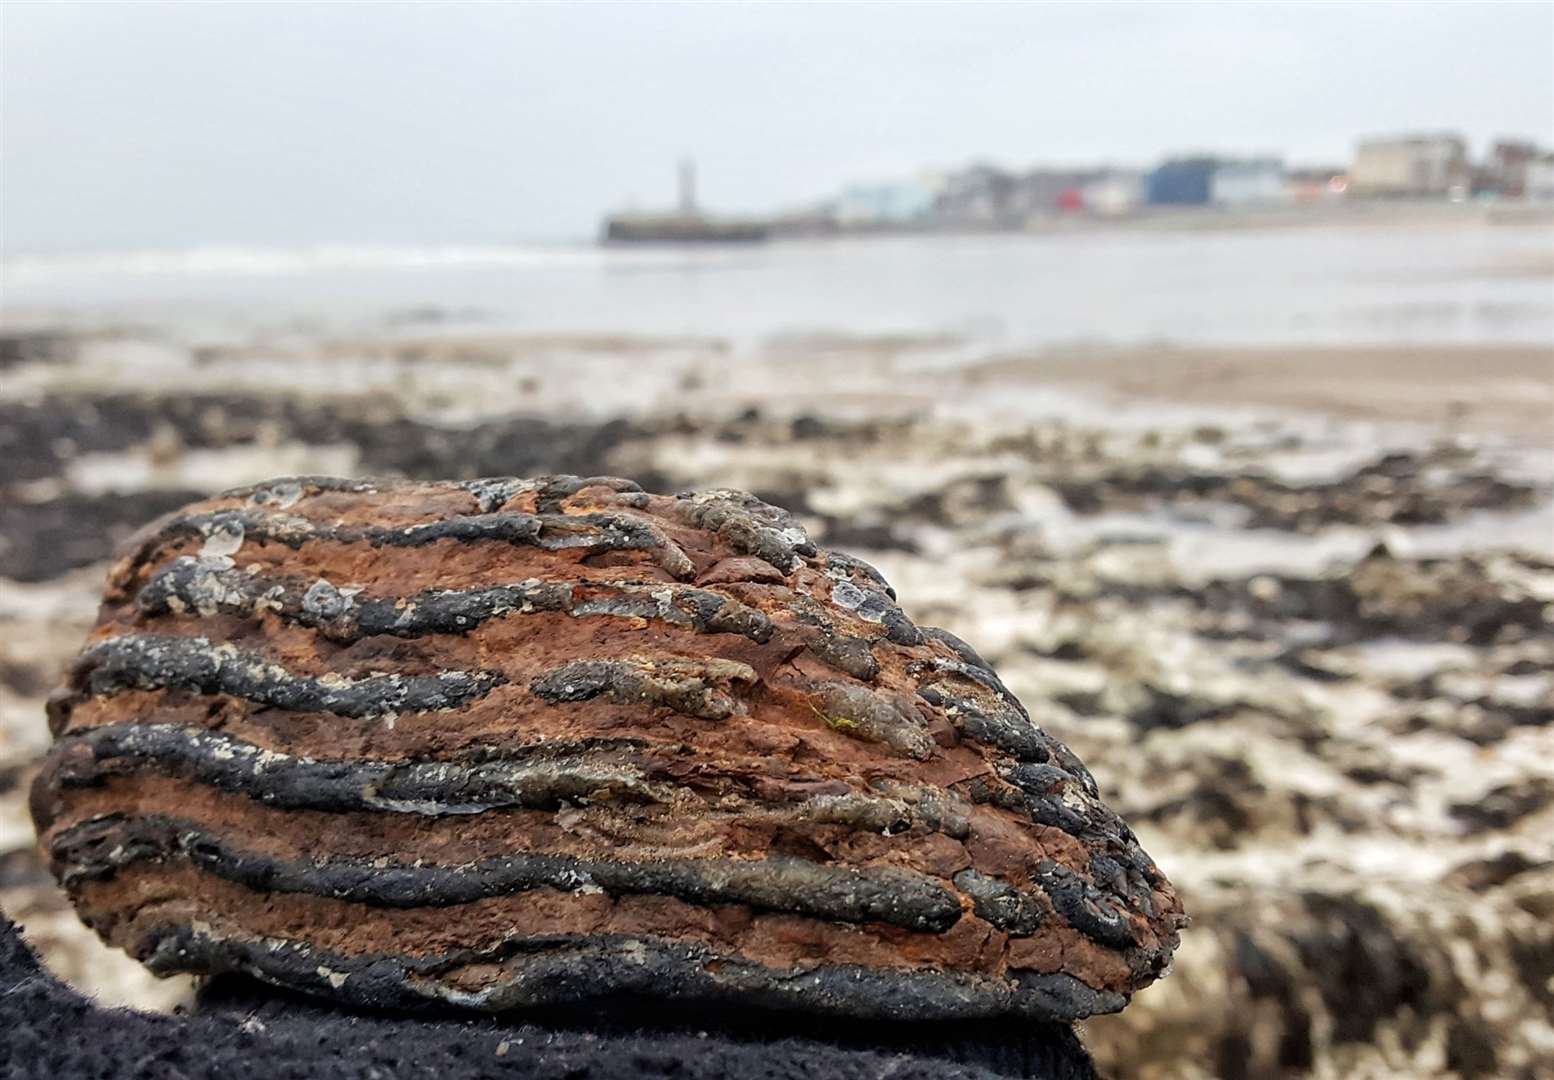 Beachcomber Frank Leppard managed to find this incredible mammoth tooth at Nayland Rocks one wintry morning. Picture: Frank Leppard